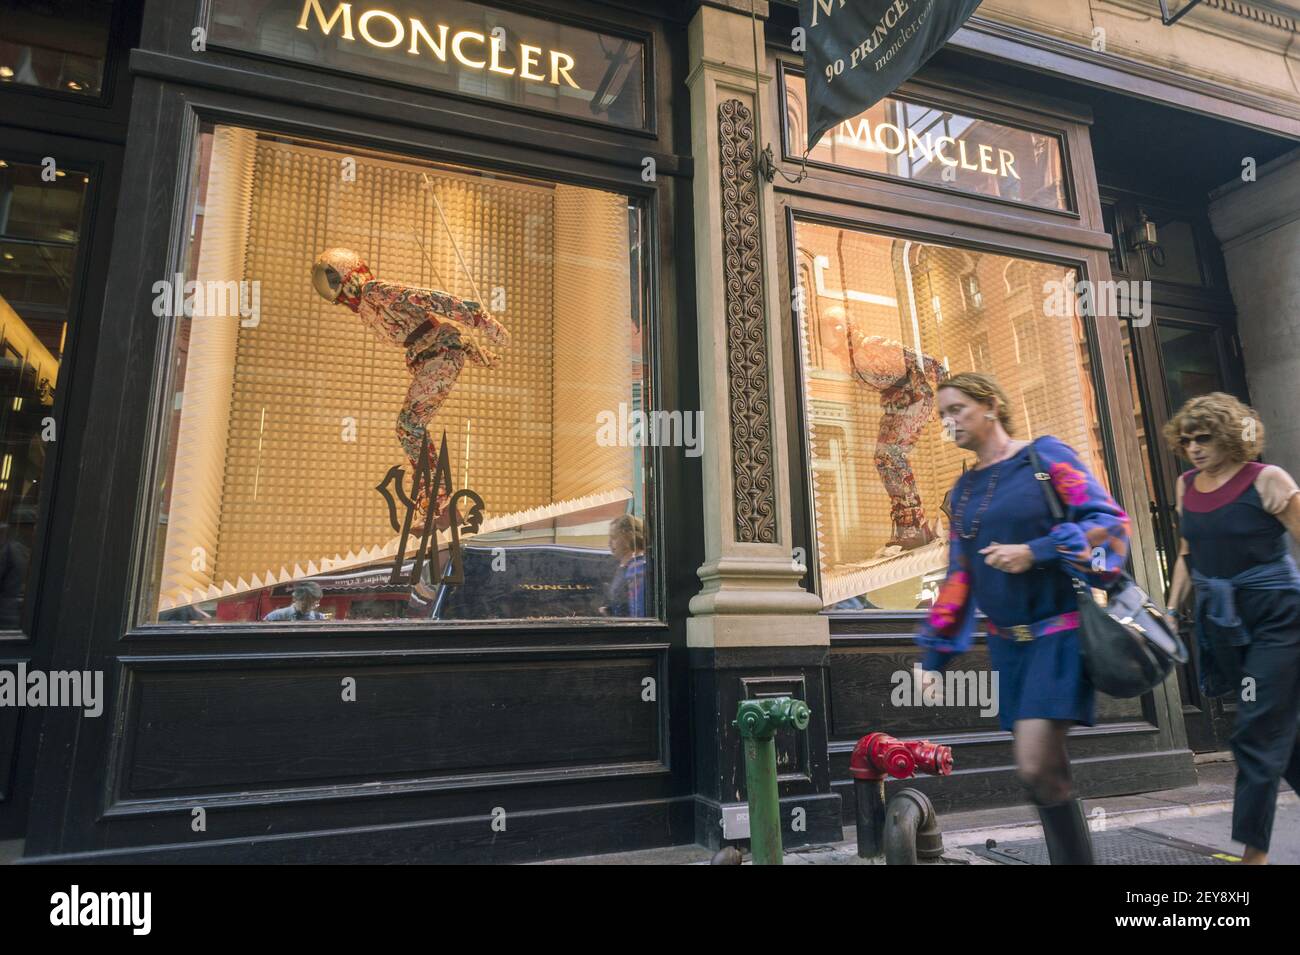 The Moncler apparel company store in the Soho neighborhood of New York on  Tuesday, October 15, 2013. The French luxury conglomerate, Kering, is  reported to be in talks to buy the luxury